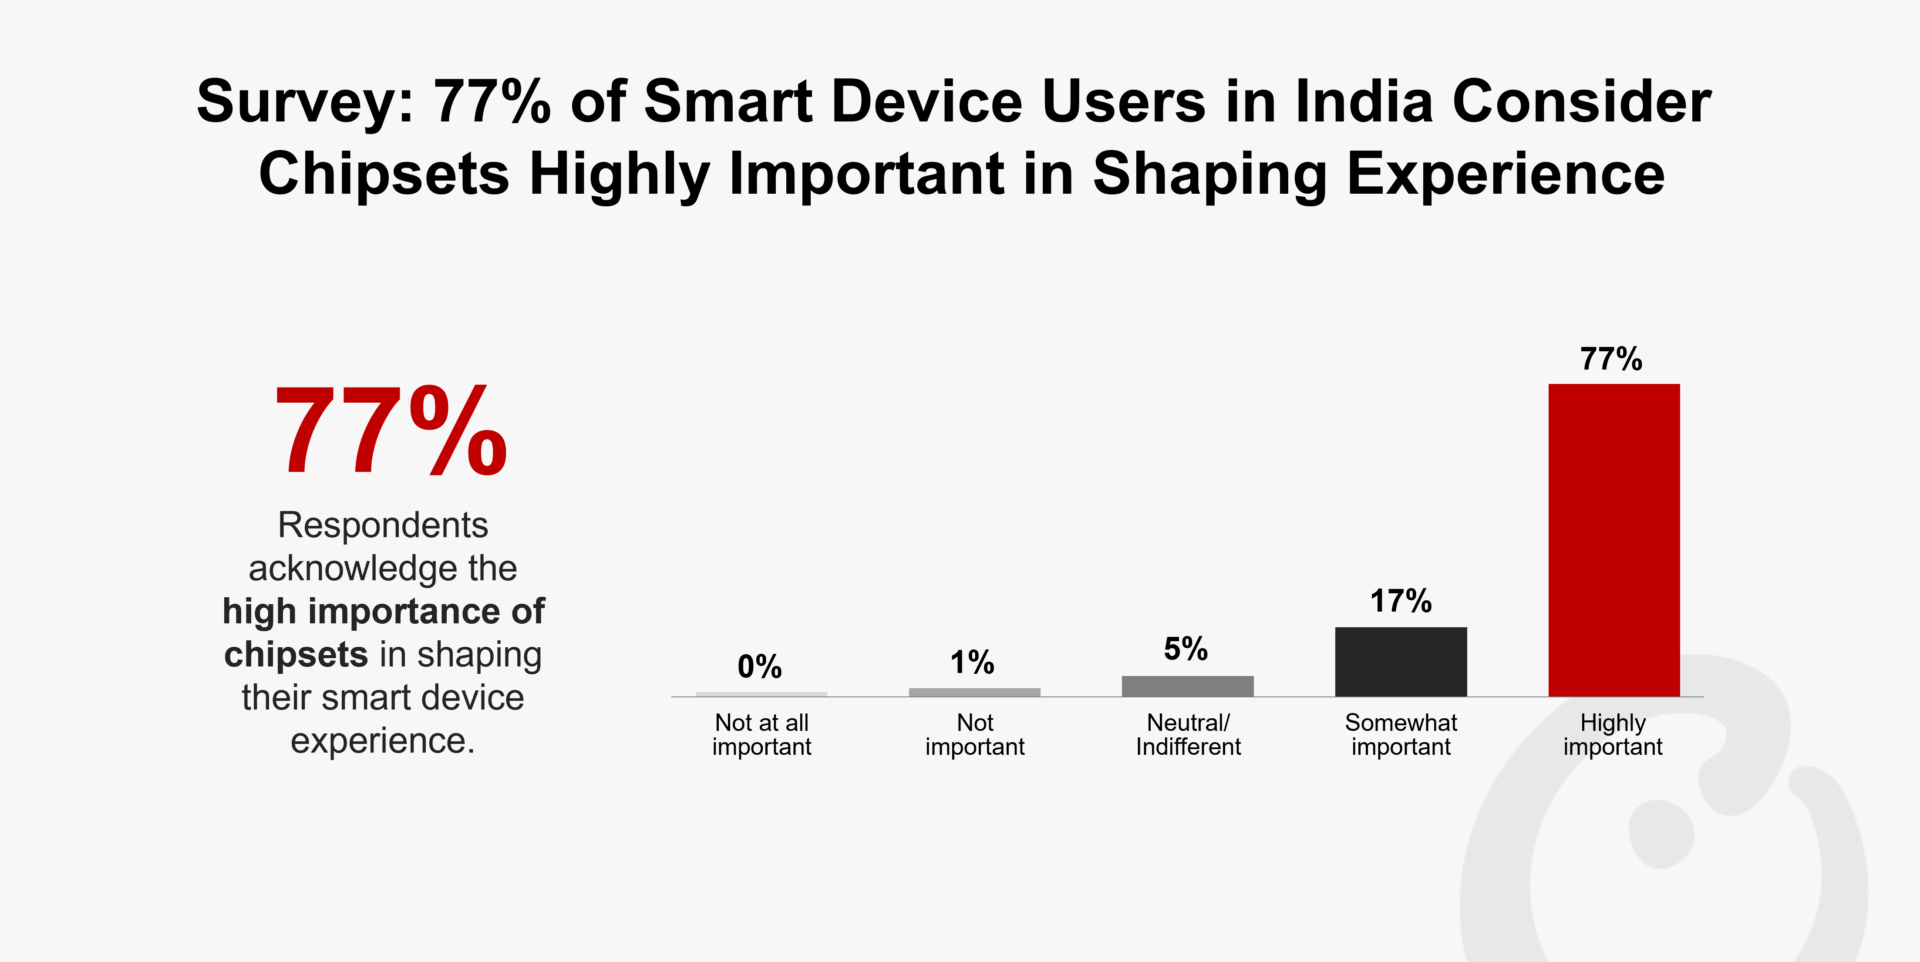 Survey: 77% of Smart Device Users in India Consider Chipsets Highly Important in Shaping Experience